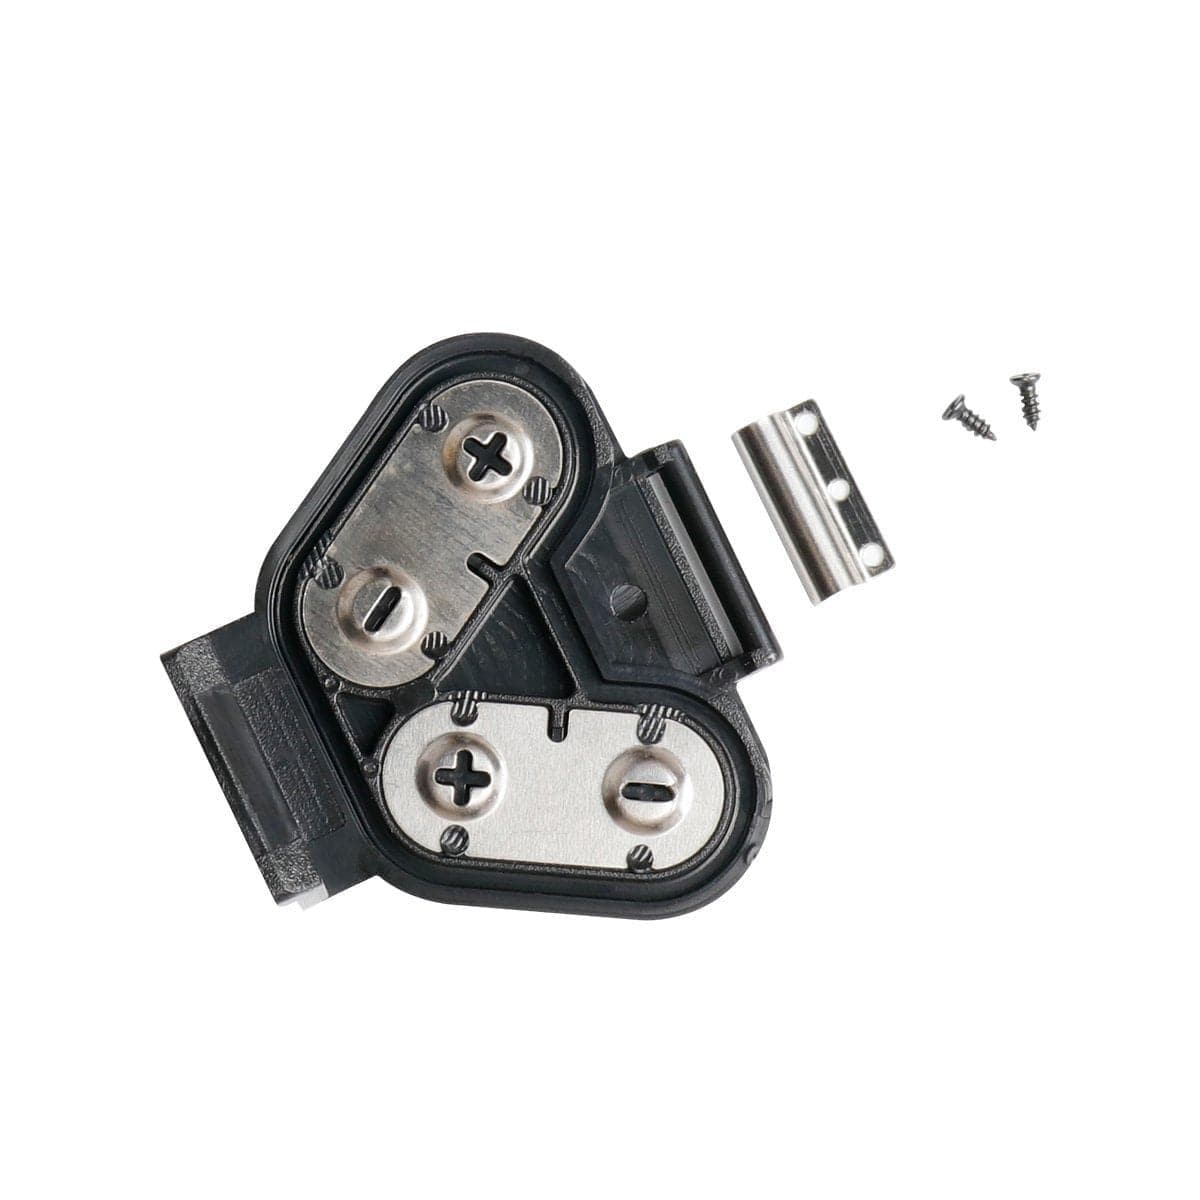 HUEPAR Battery Compartment Cover with free shipping available at HUEPAR US0